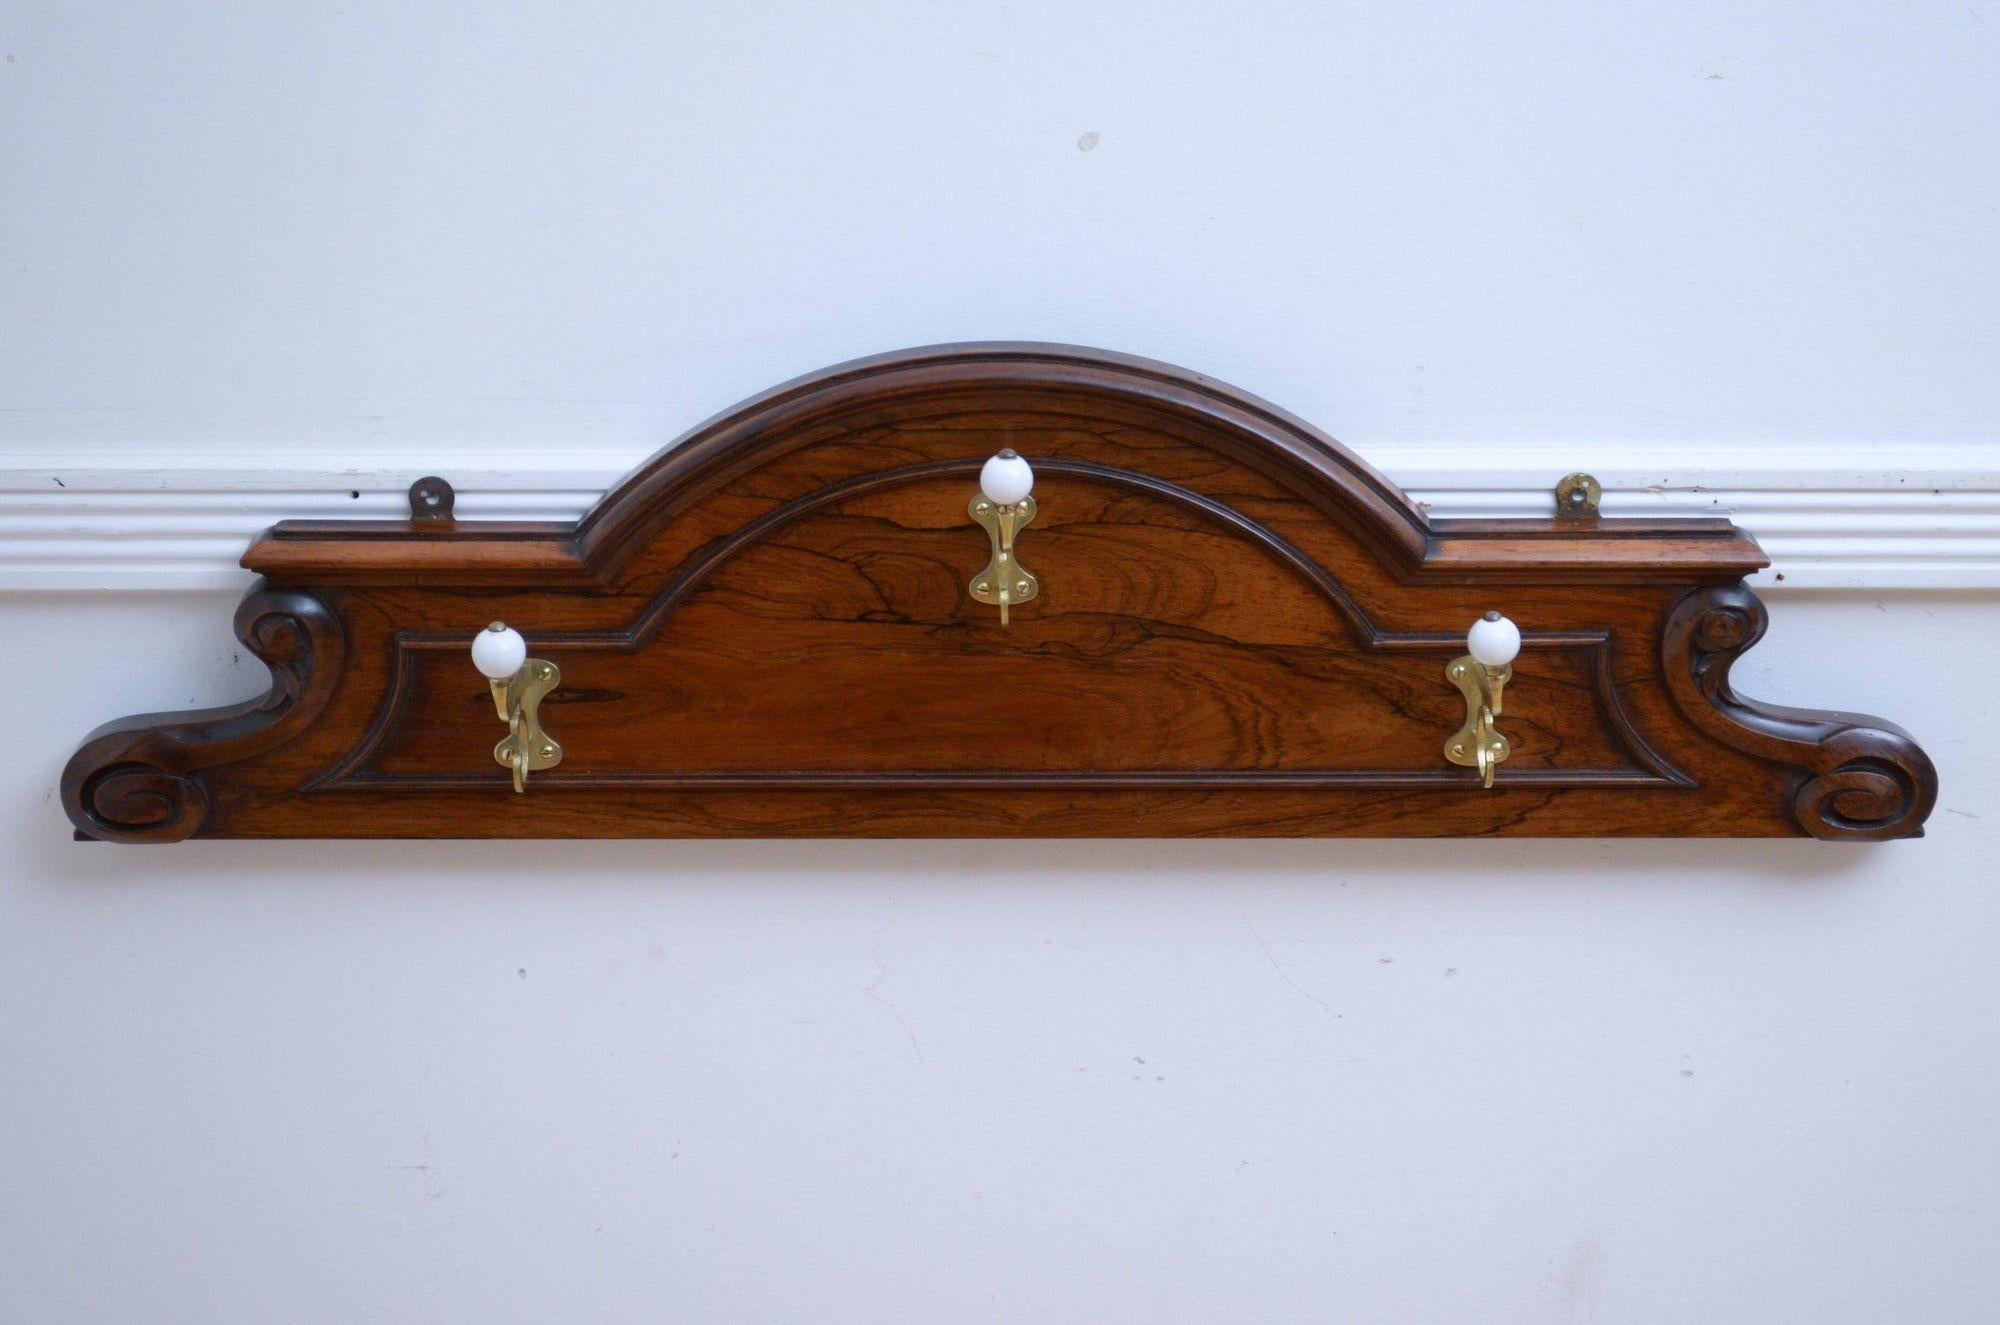 P0295 Fine quality and very attractive Victorian wall mounted coat rack with three shaped brass and porcelain hooks on arched and moulded rosewood backing with decorative scrolls to each side. This antique coat rack is in home ready condition.